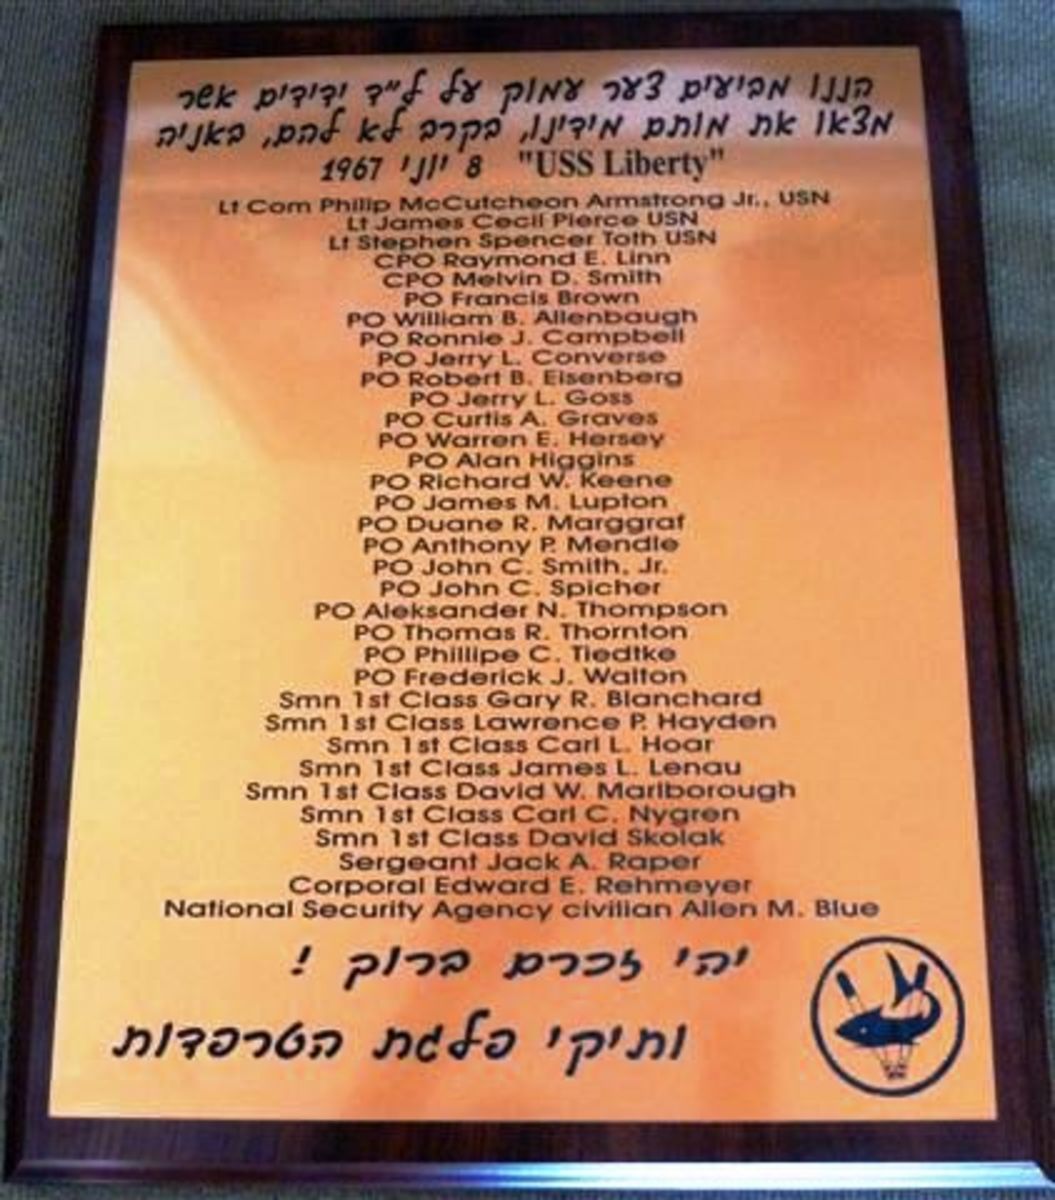 A commemorative plaque for the USS Liberty members who were killed in the attack in the Israeli Navy Clandestine Museum.